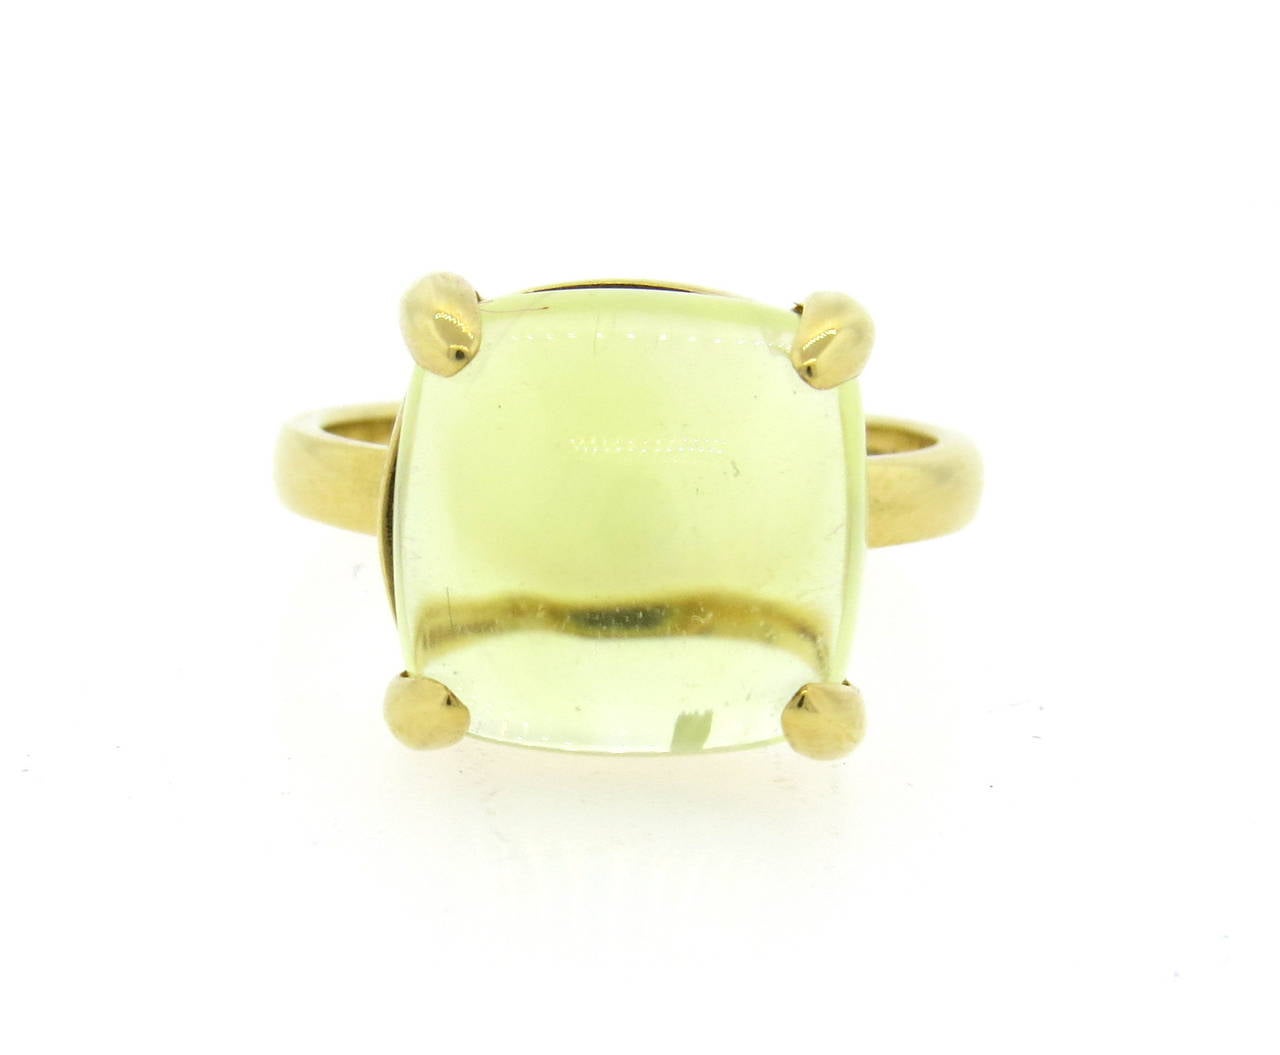 Tiffany & Co. ring by Paloma Picasso for Sugar Stacks collection with largest size lemon citrine cabochon in 18k gold. Ring size 6 1/2, ring top is 12mm x 12mm. Marked Tiffany & Co,Paloma Picasso and 750. weight - 6.8gr